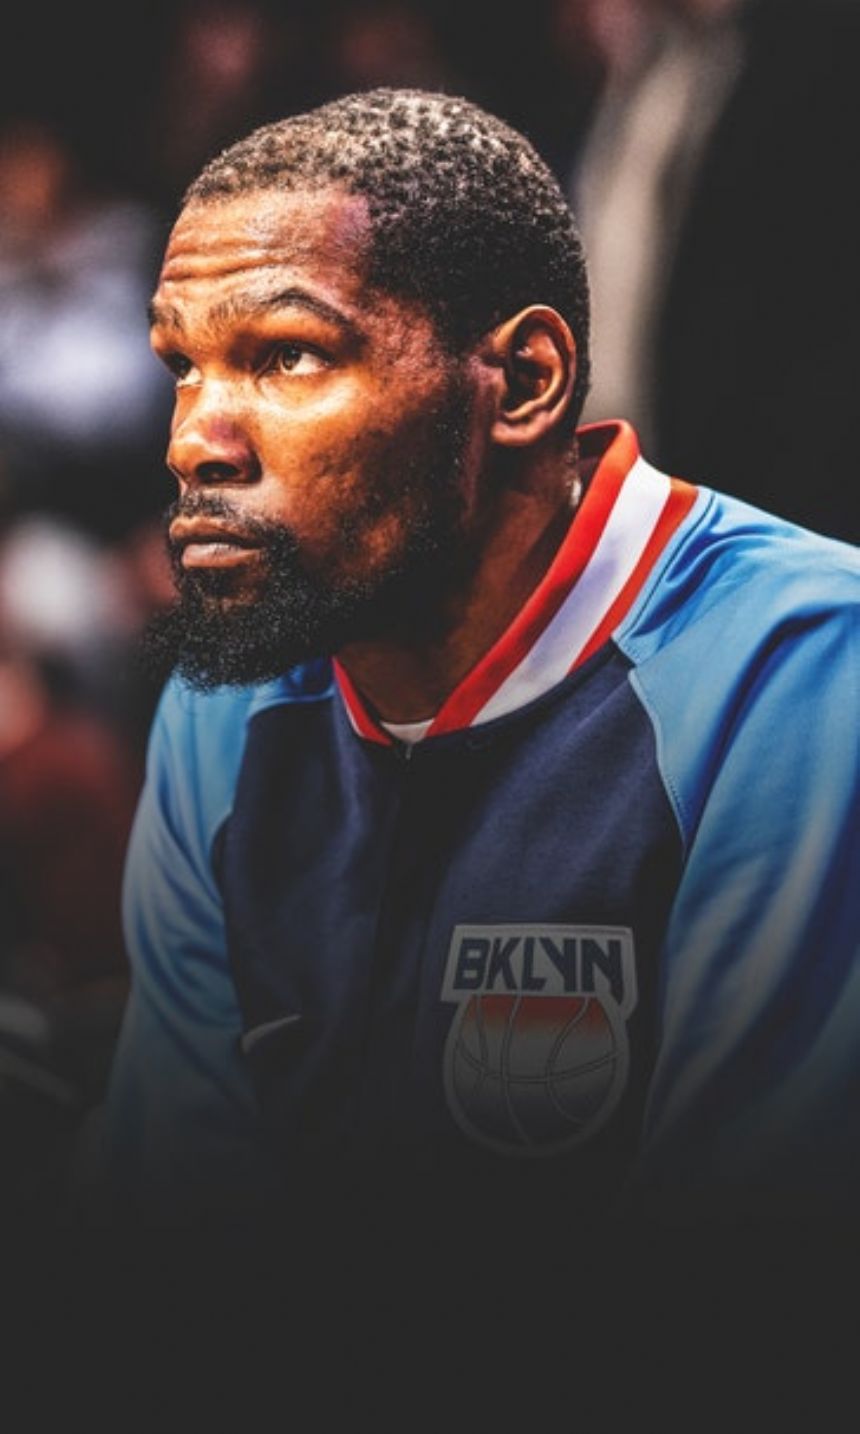 Will Kevin Durant's legacy be affected by fourth team?